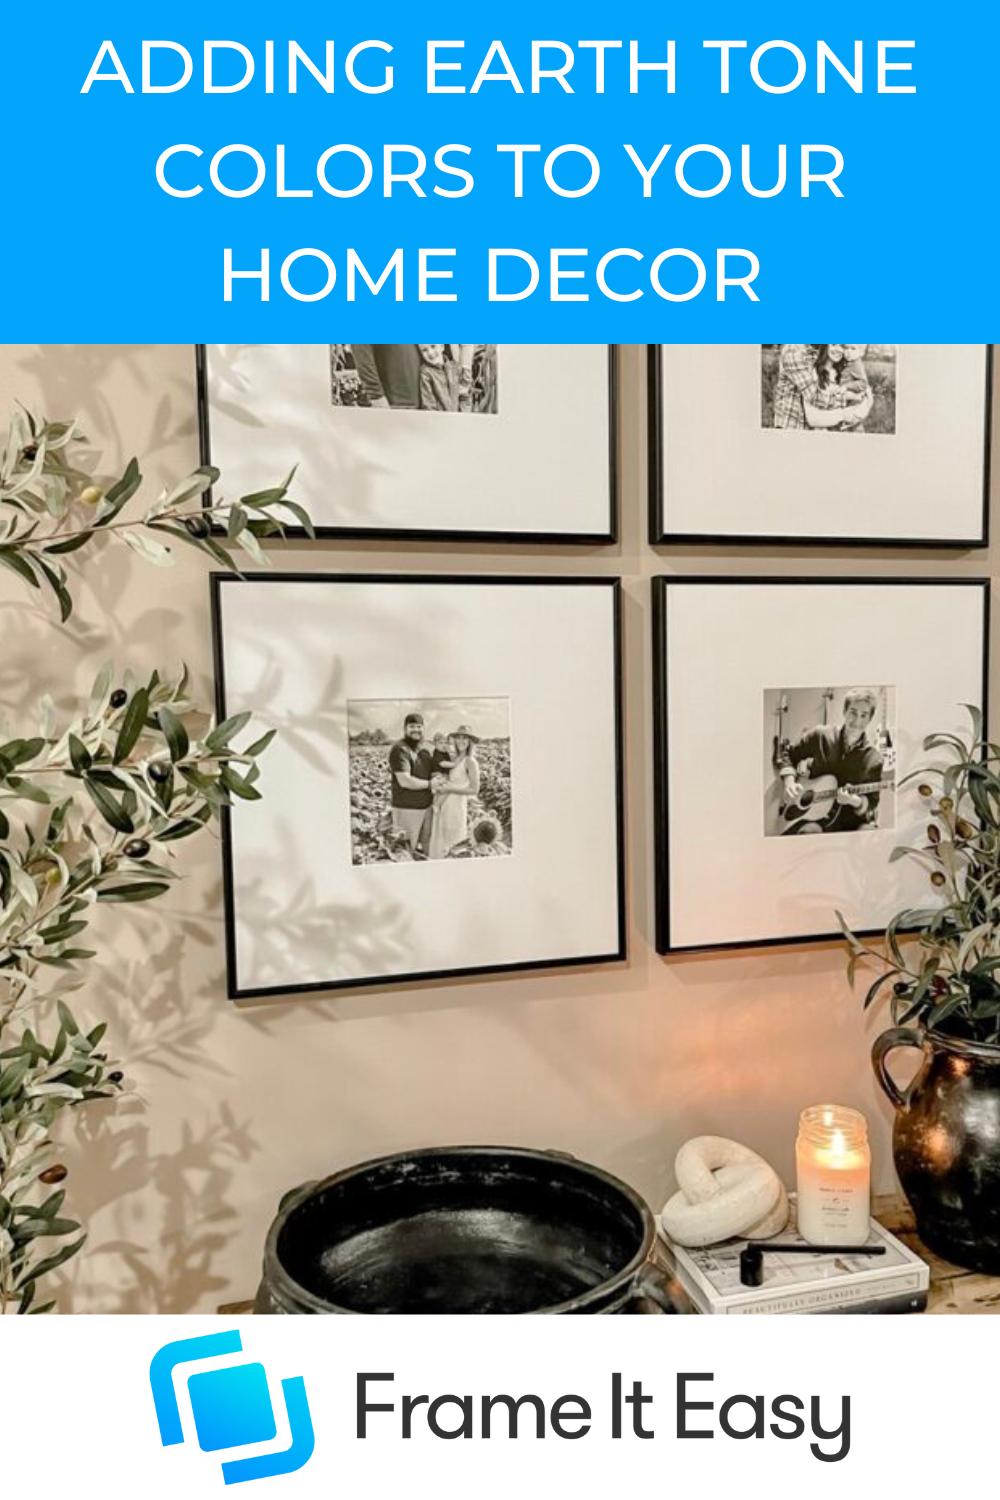 Adding Earth Tone Colors To Your Home Decor